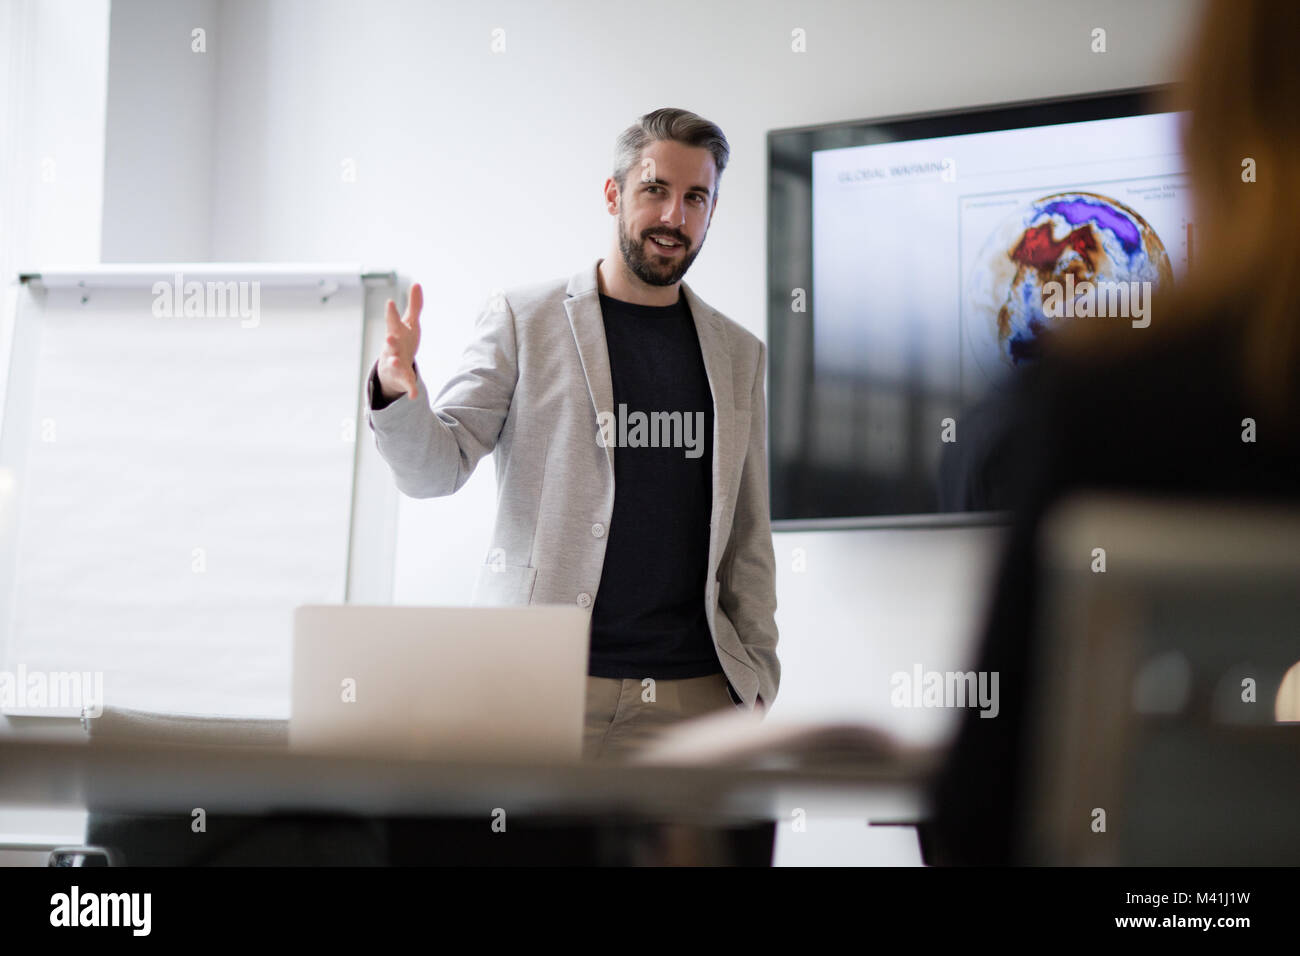 Male business executive giving a presentation Stock Photo